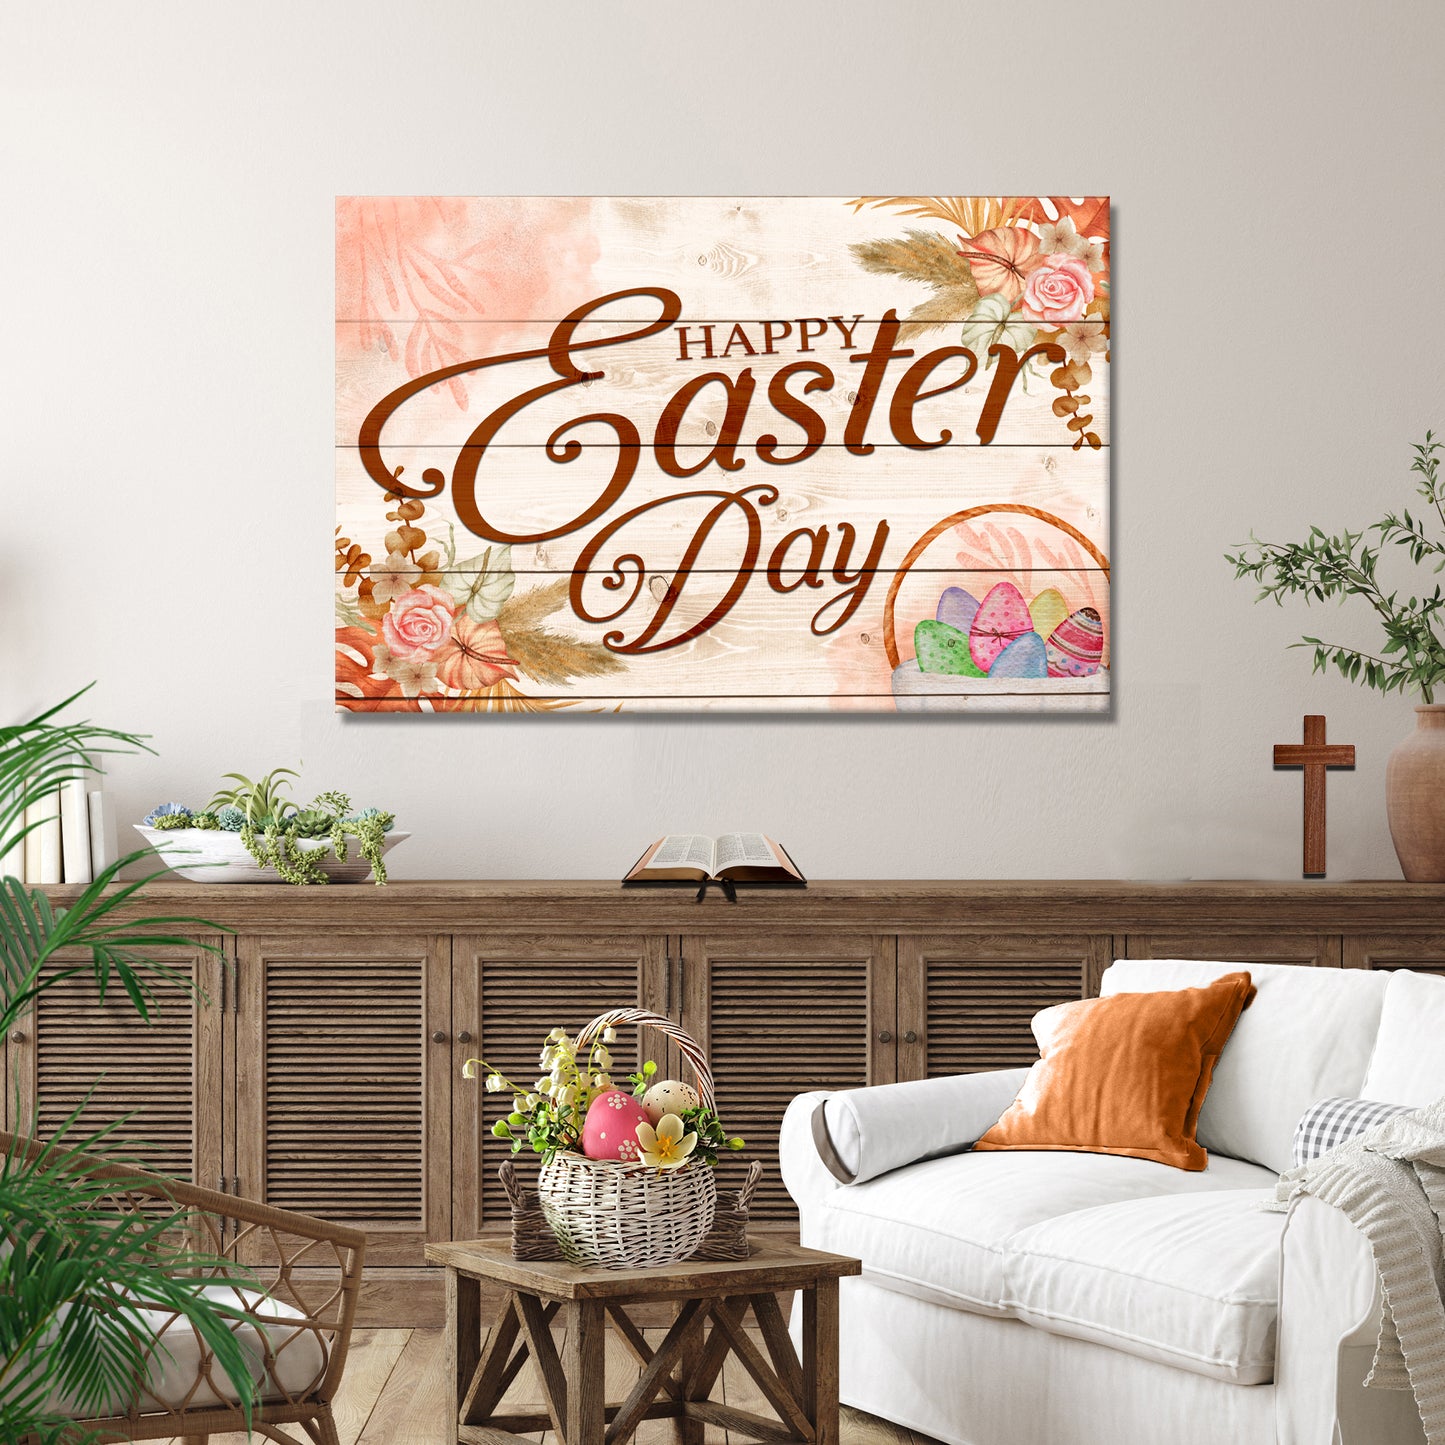 Happy Easter Greetings Sign - Image by Tailored Canvases